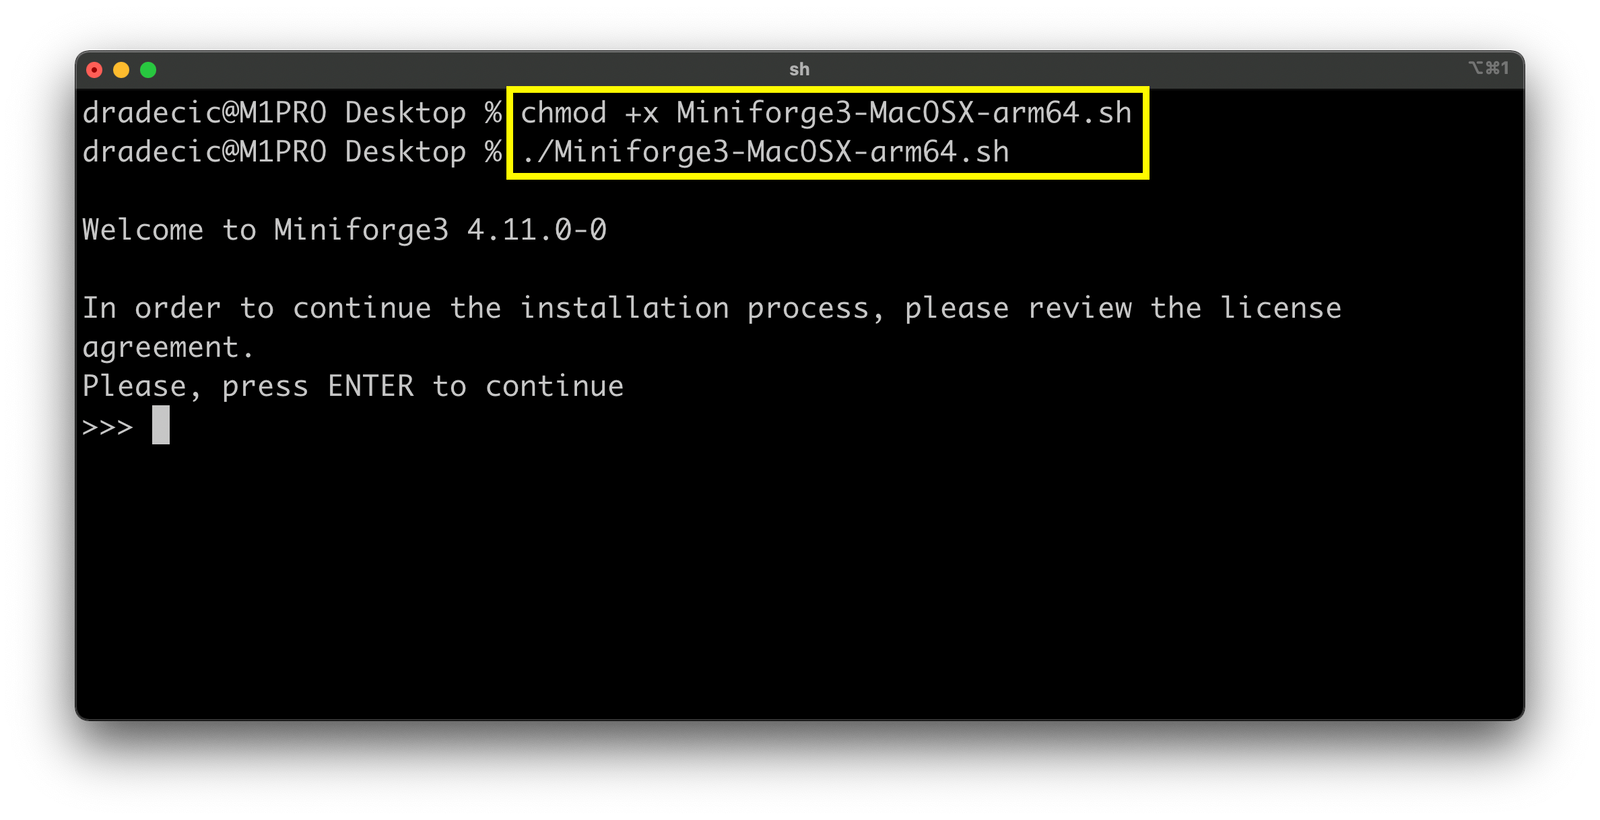 Image 2 - Installing Miniforge from the terminal (image by author)